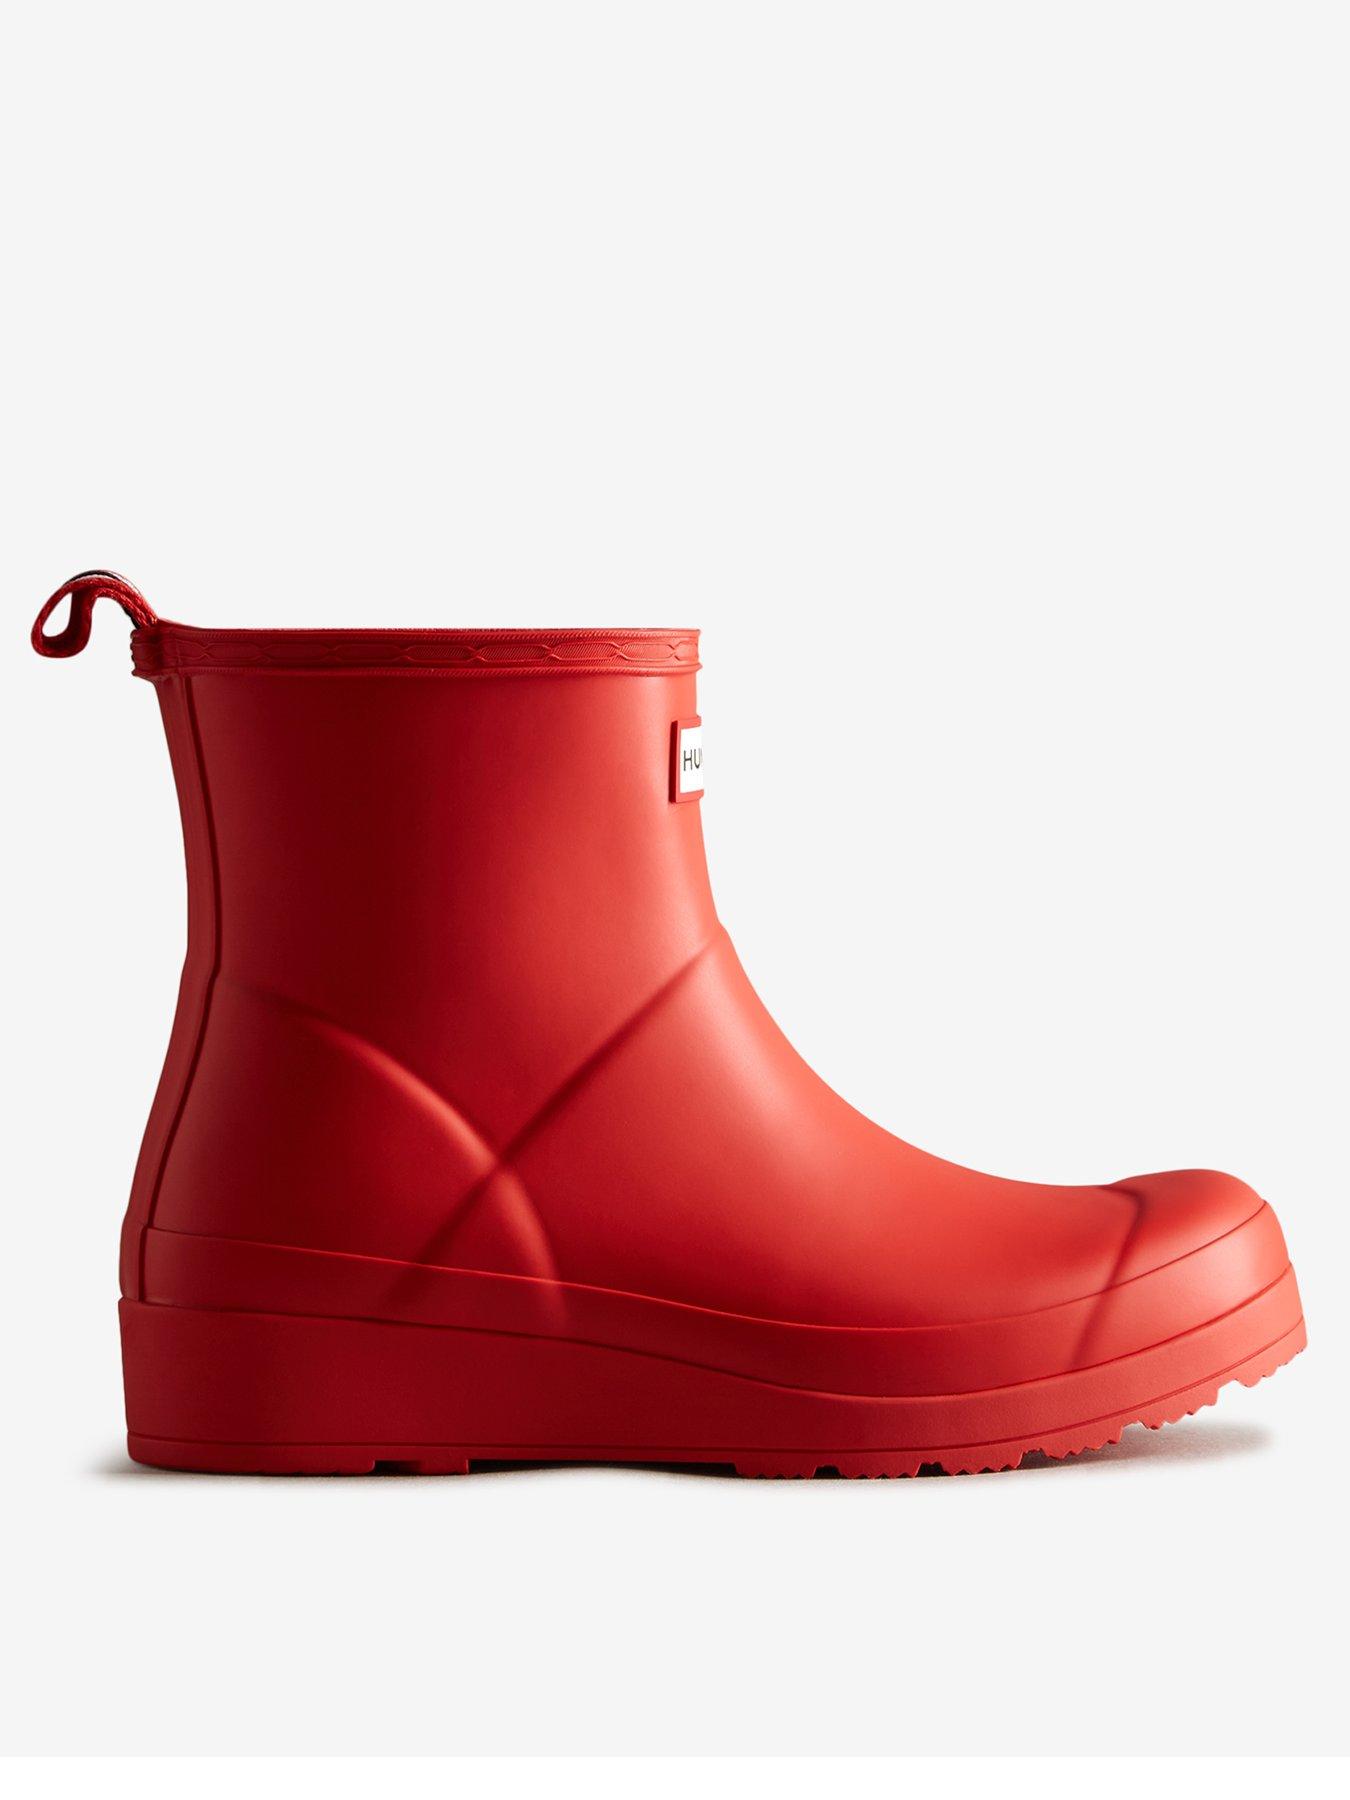 Hunter Boots - Introducing the new Calendar Sole boot.